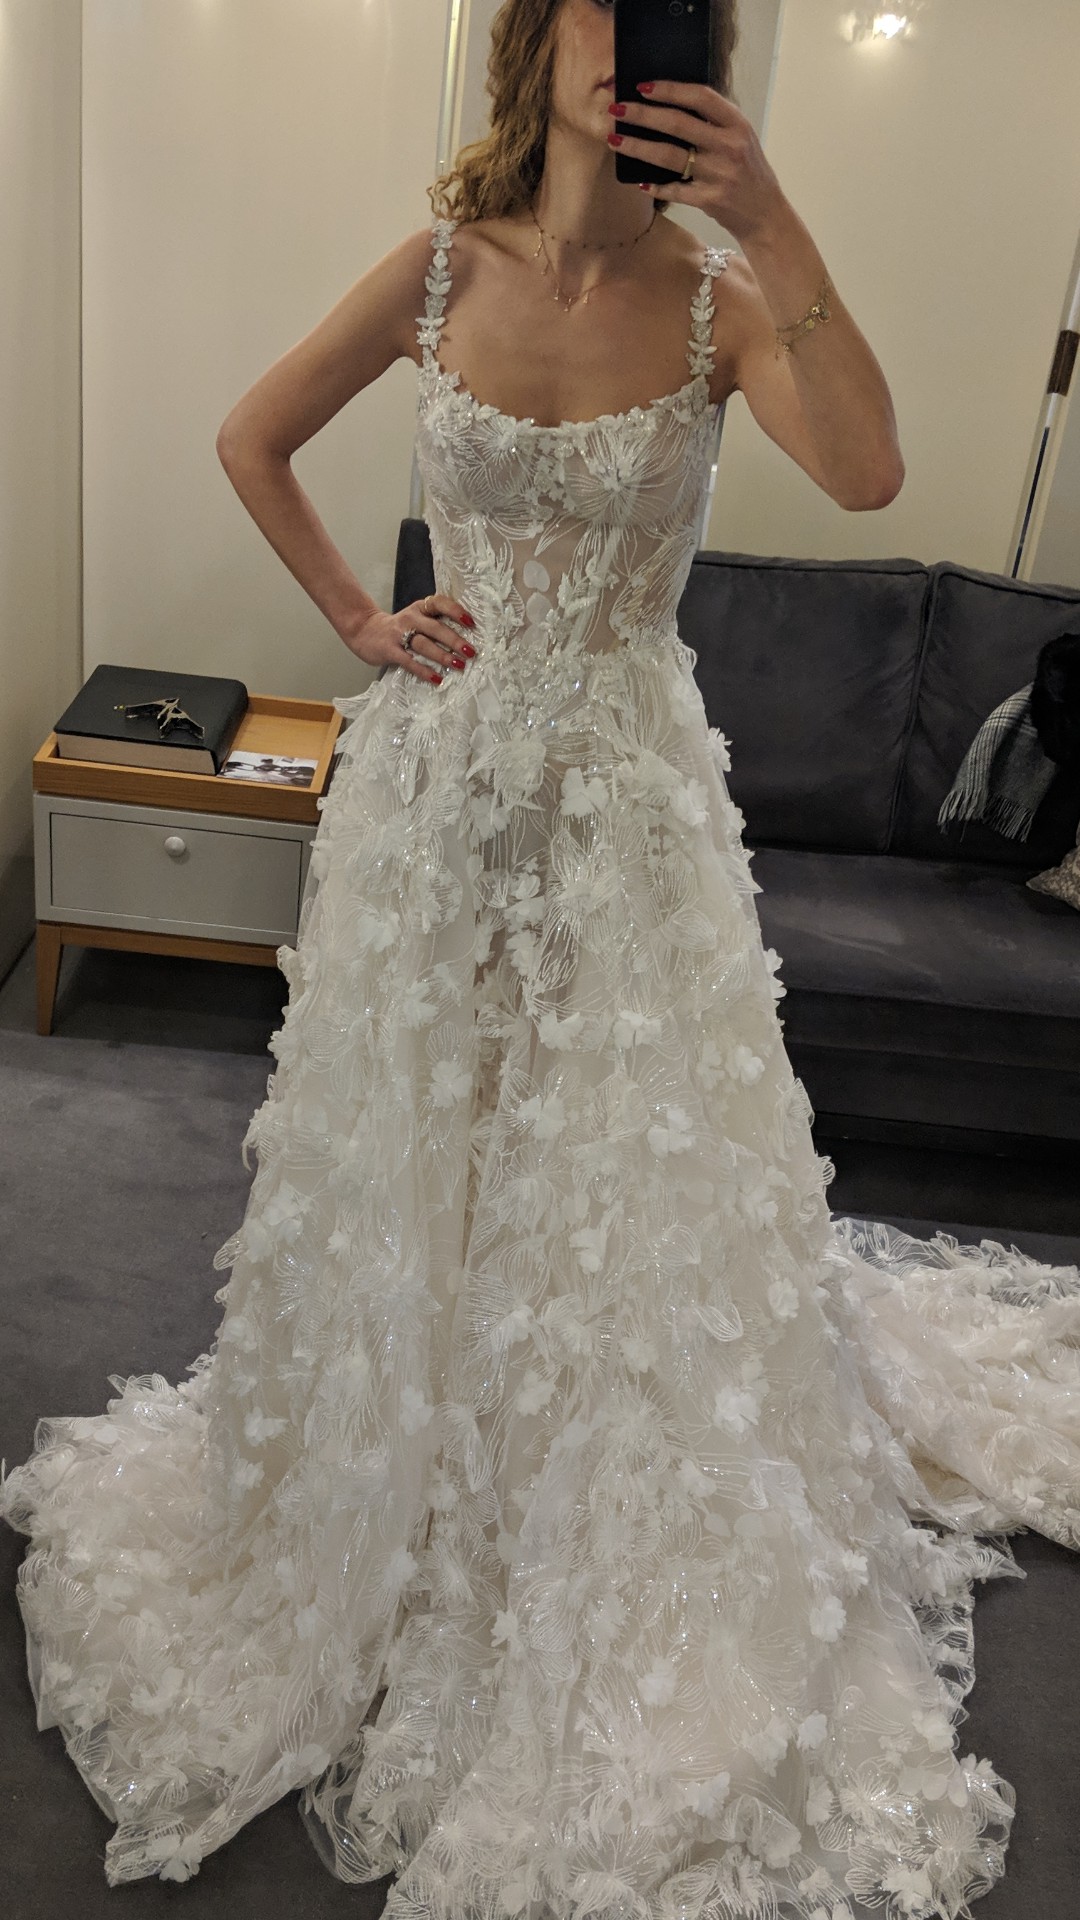 brother wedding dress for sister